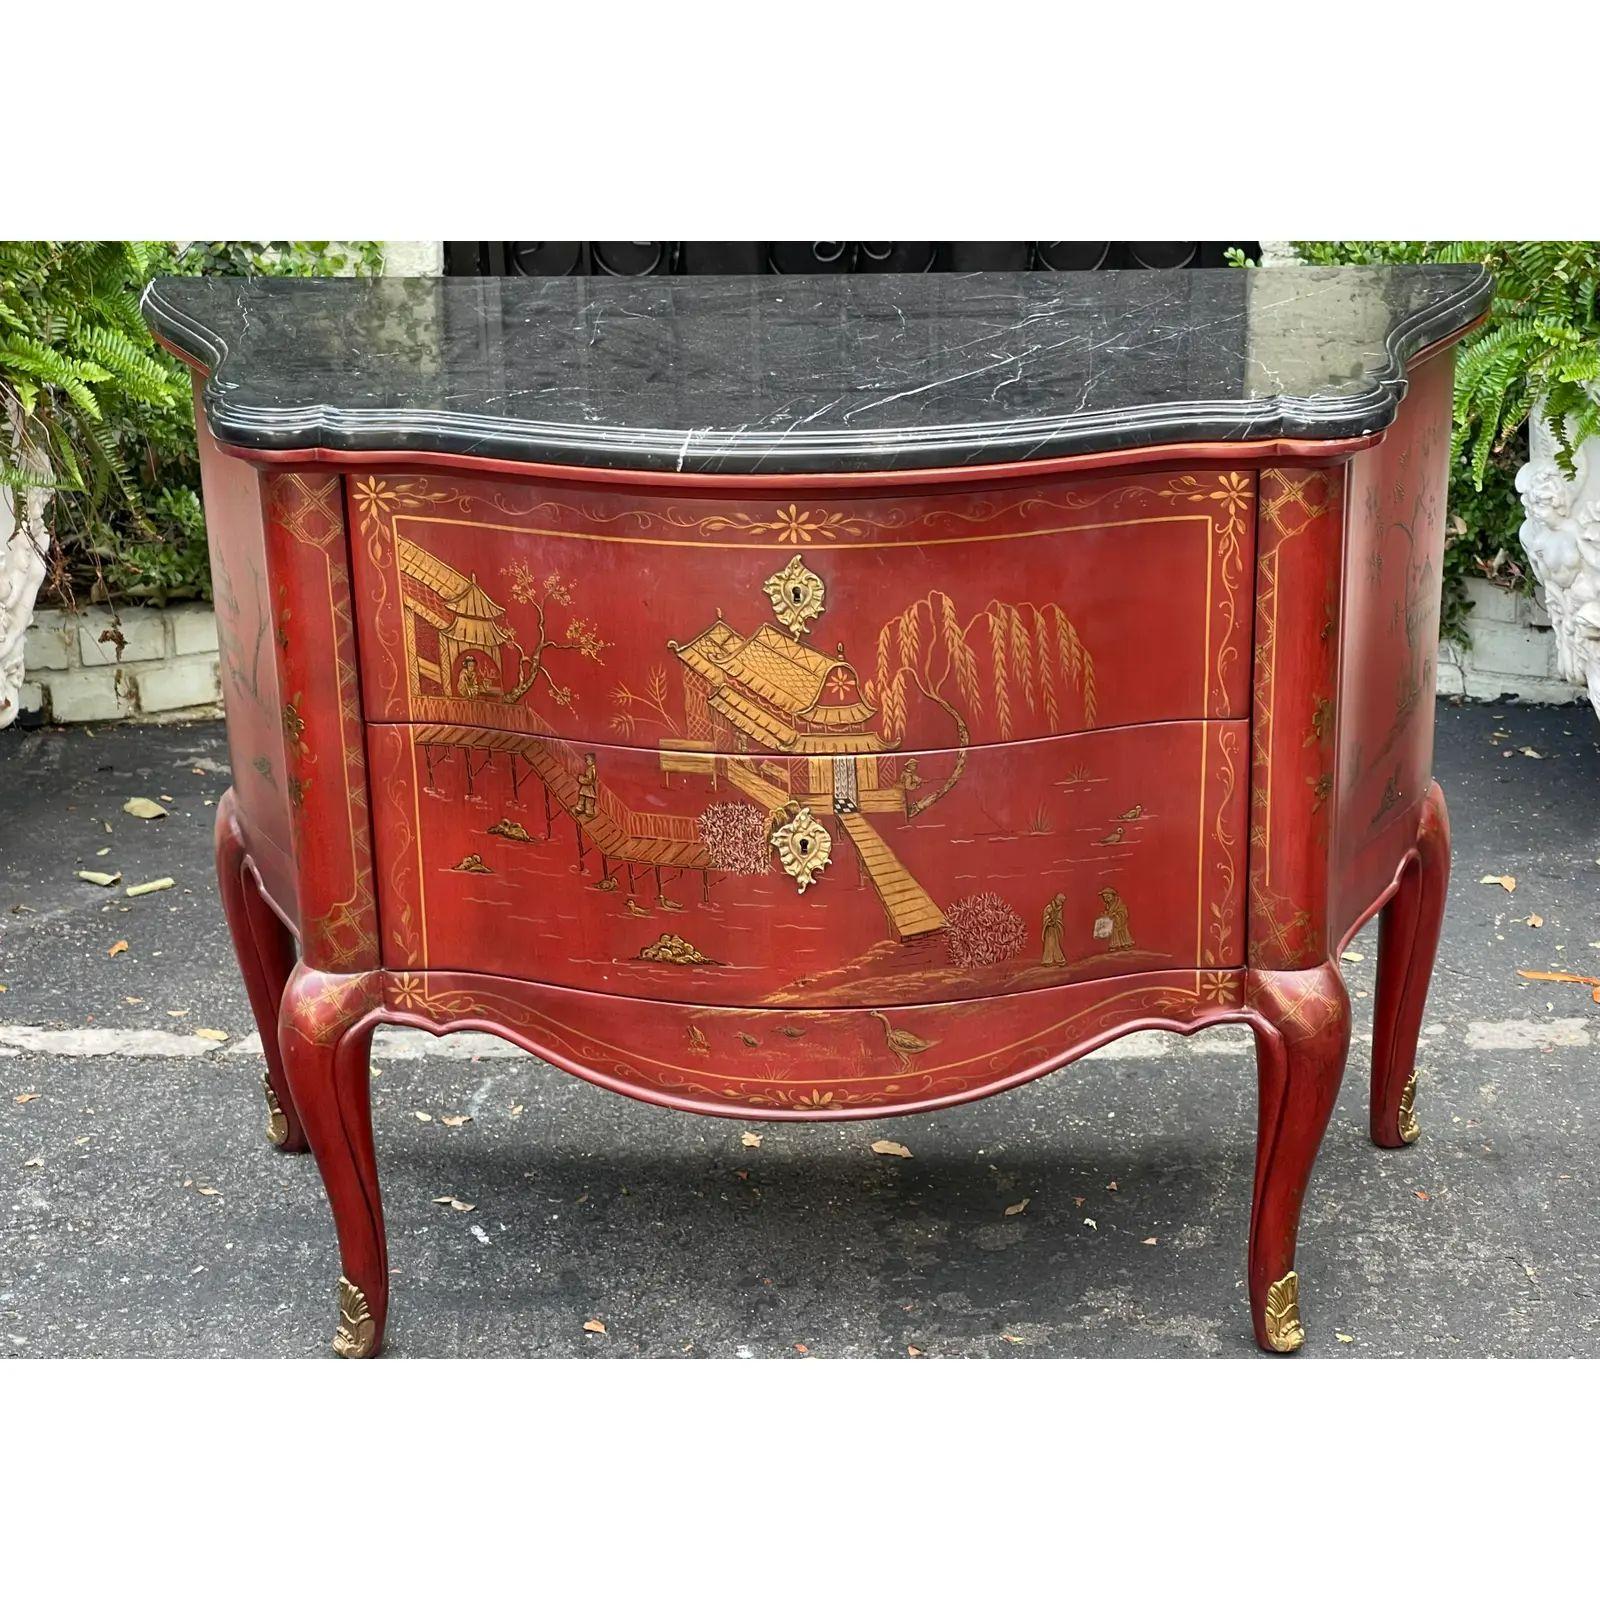 19th century Style red chinoiserie & black marble commode - The Newport Historic Mansion Collection. It features beautifully hand painted chinoiserie decoration on a red ground. It was made by E. J. Victor for the Historic Society of